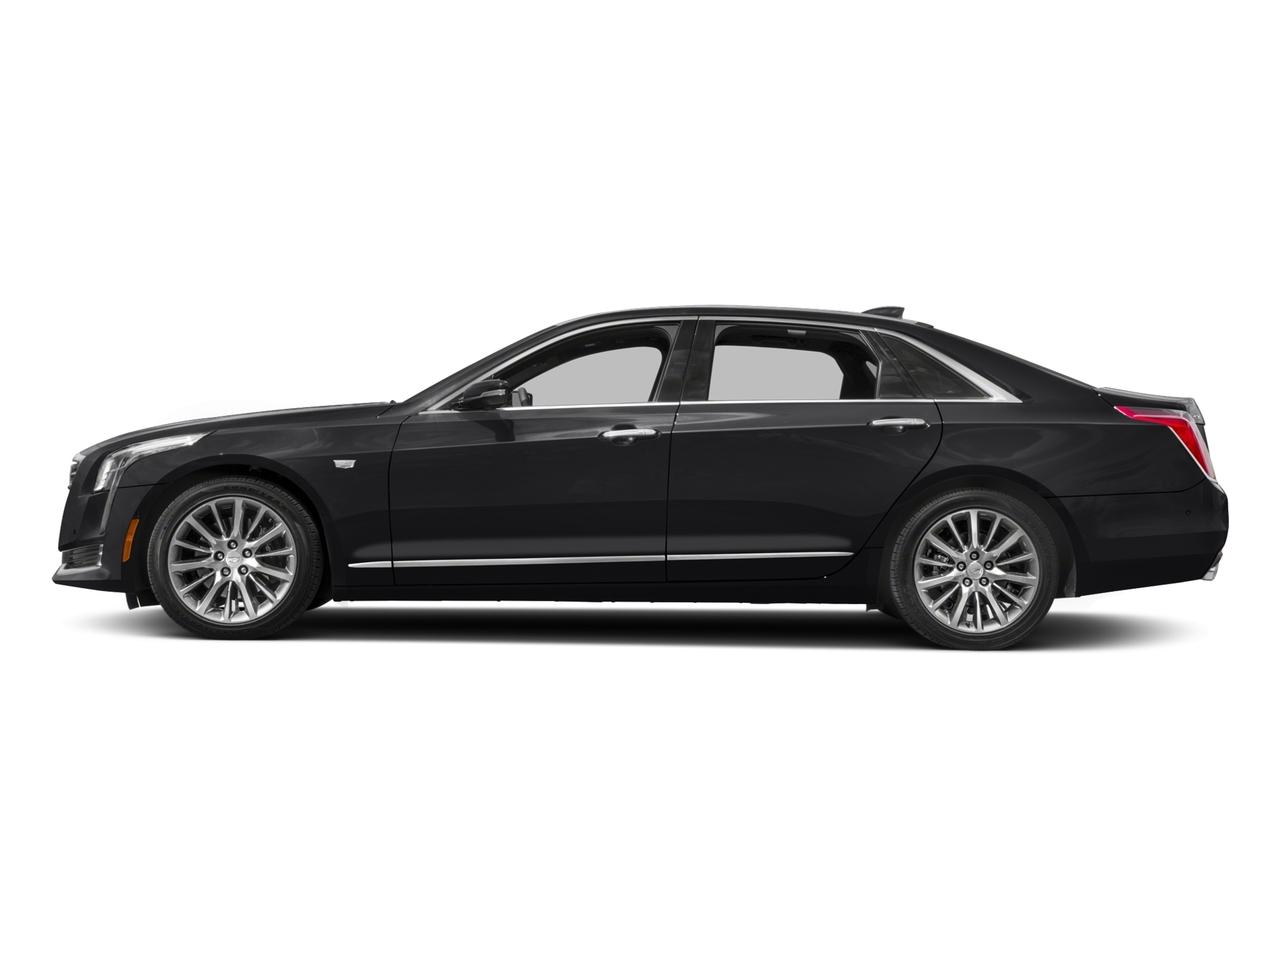 Used 2016 Cadillac CT6 For Sale Raleigh NC | U67535